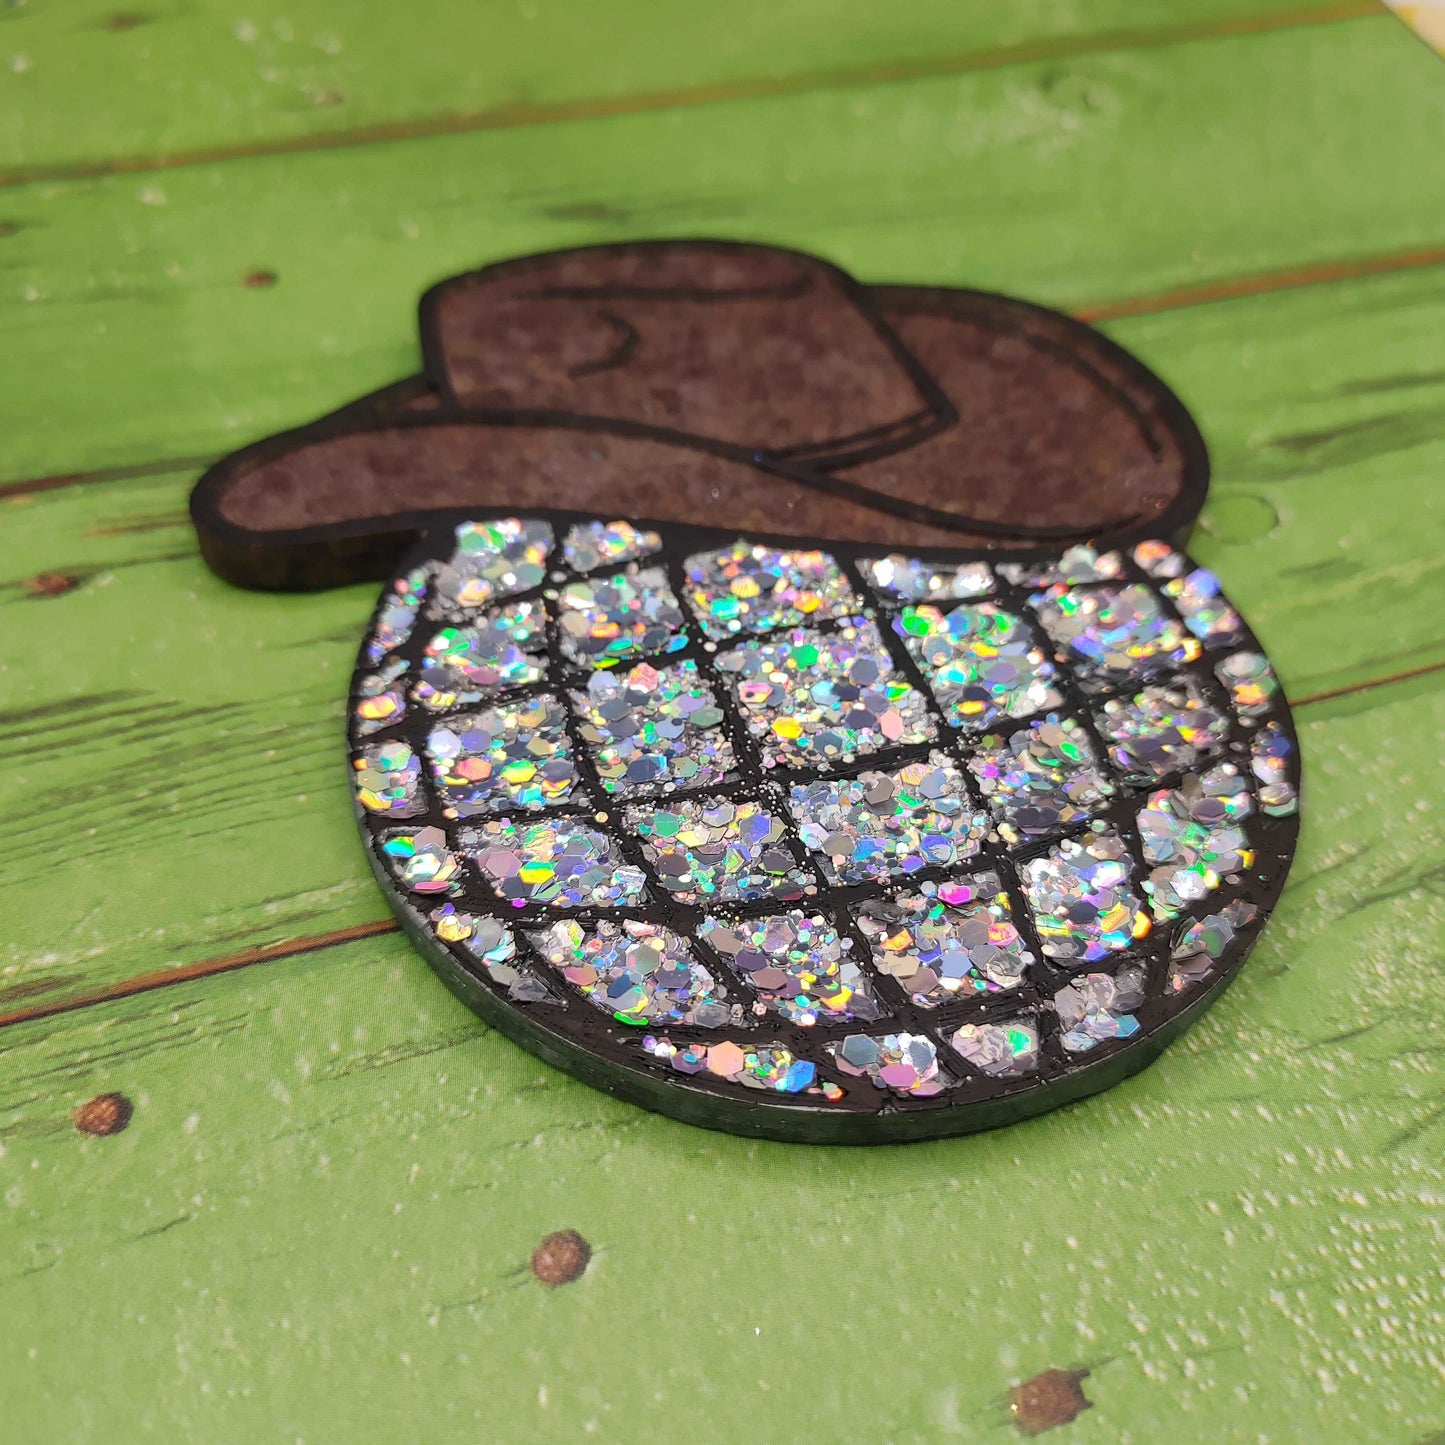 Disco Ball with cowboy hat - Silicone freshie mold